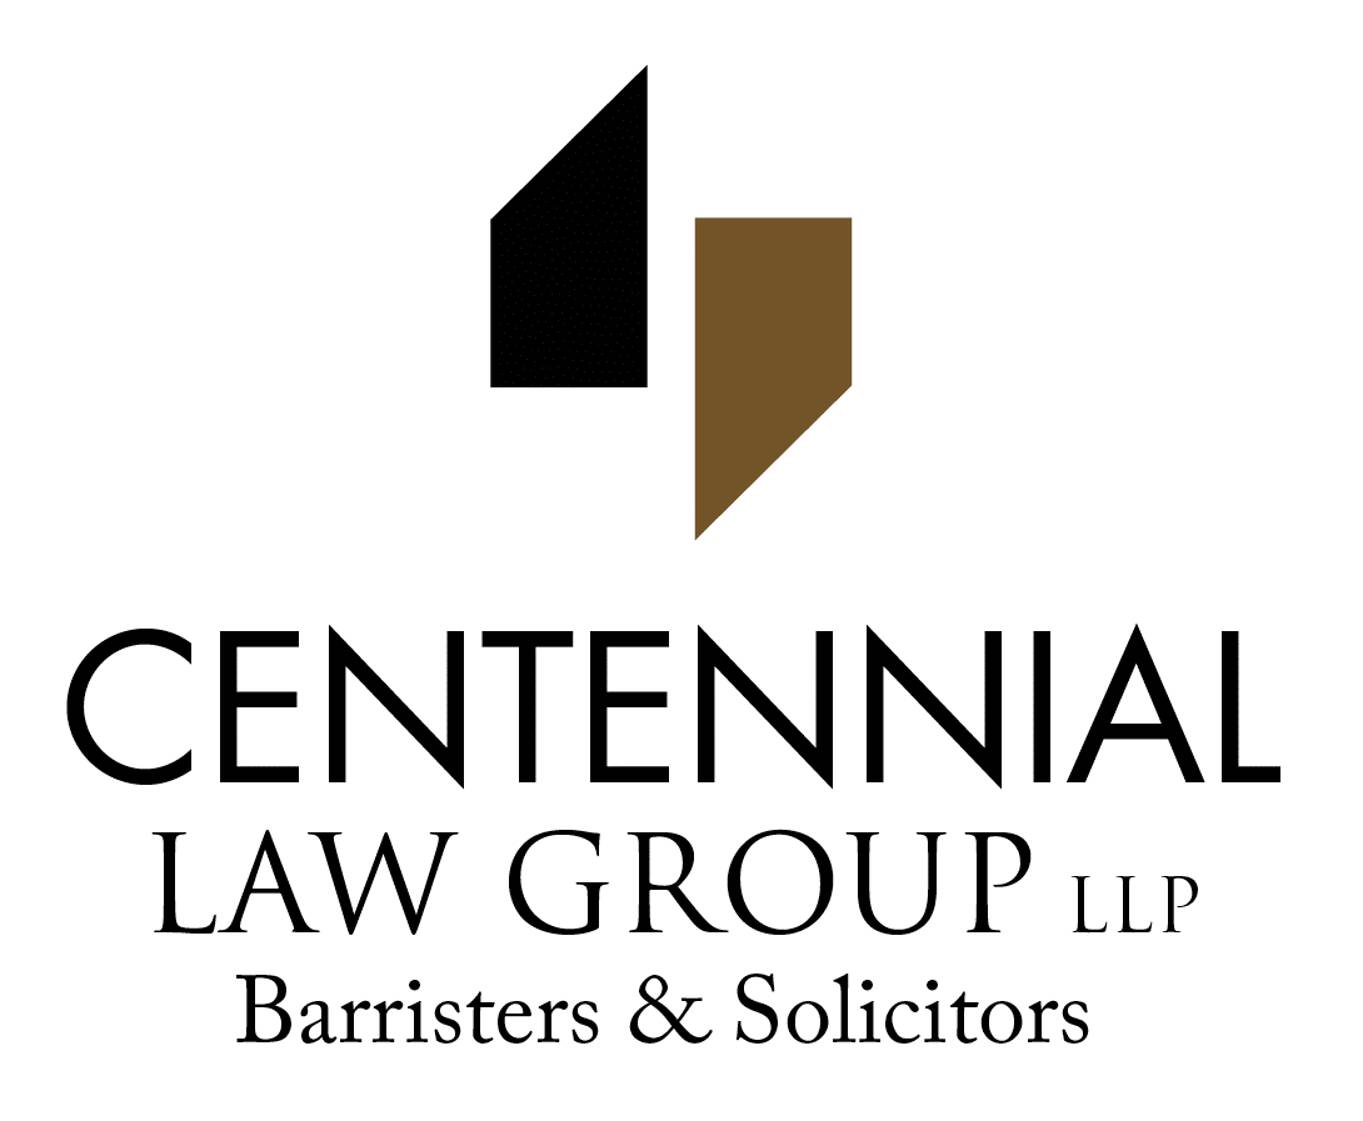 Centennial Law Group Barrister & Solicitors